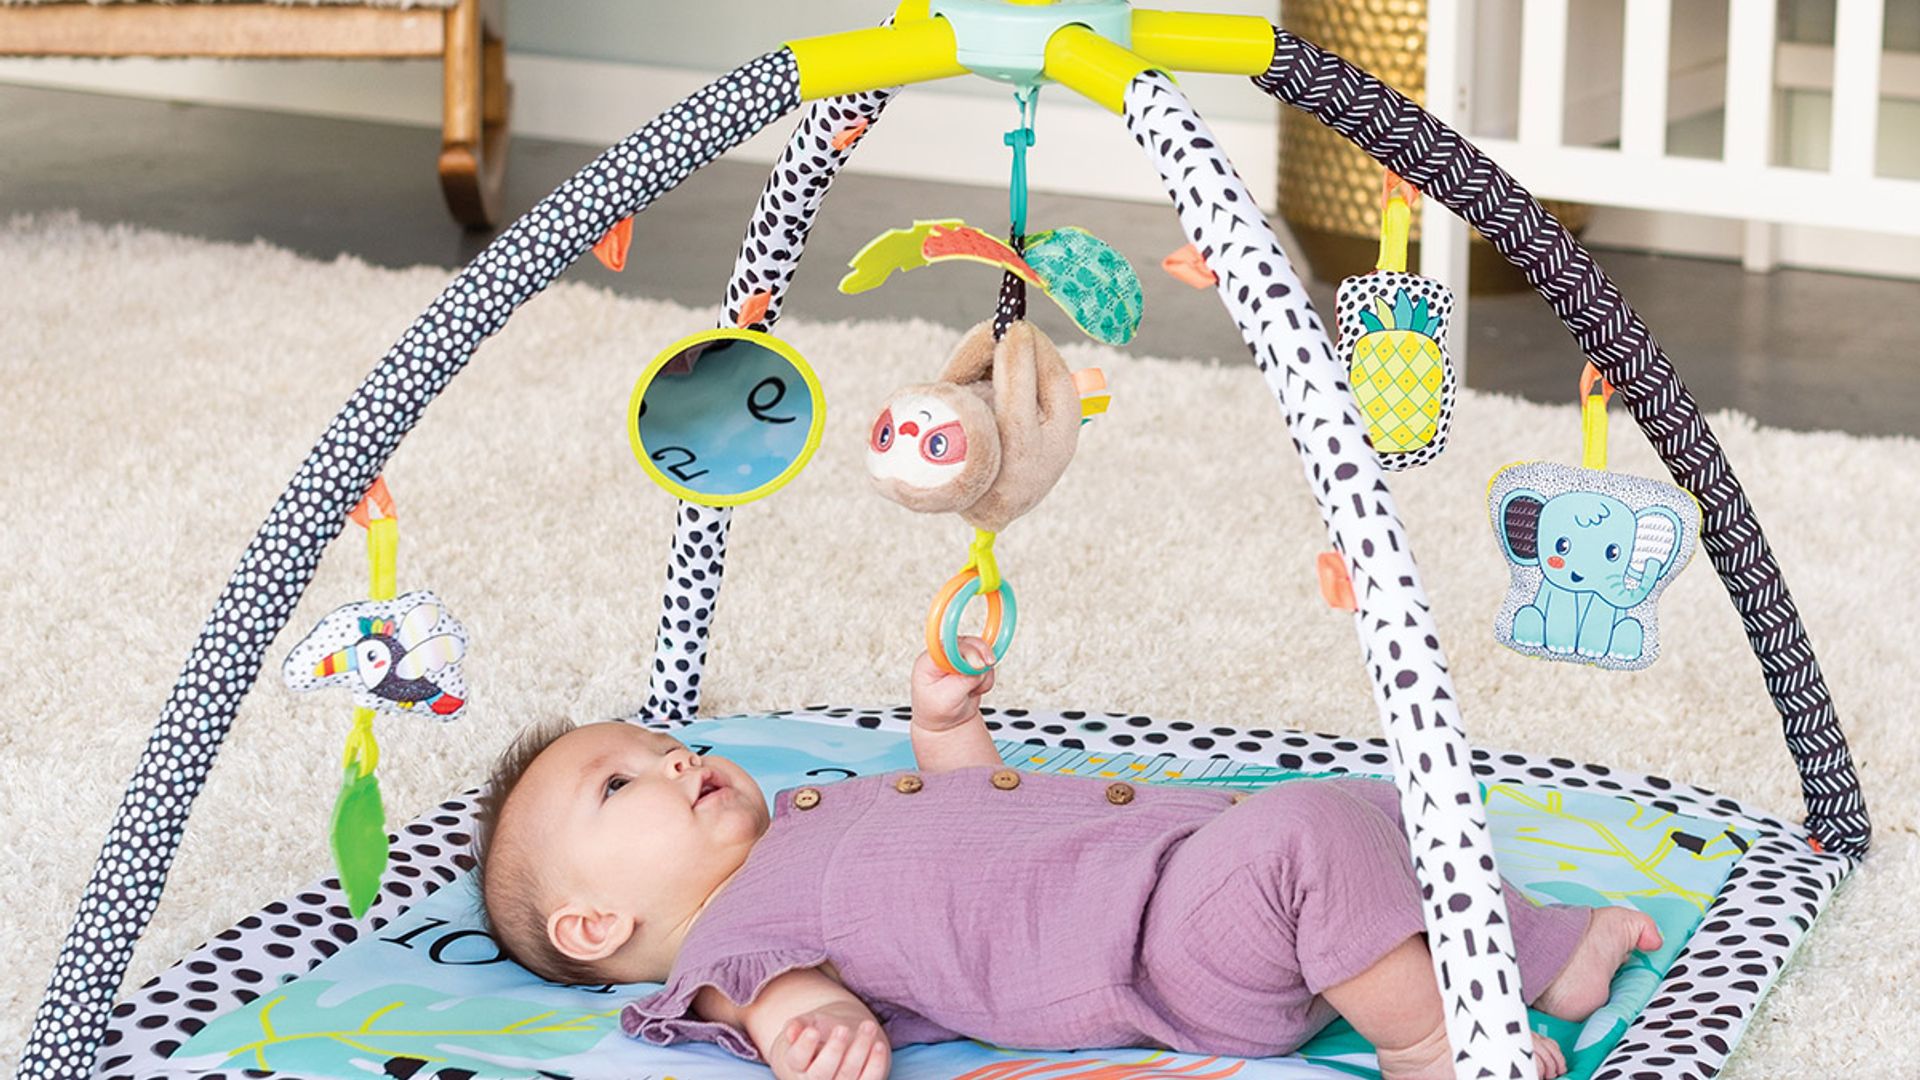 8 best baby play mats to entertain and educate your little one from home